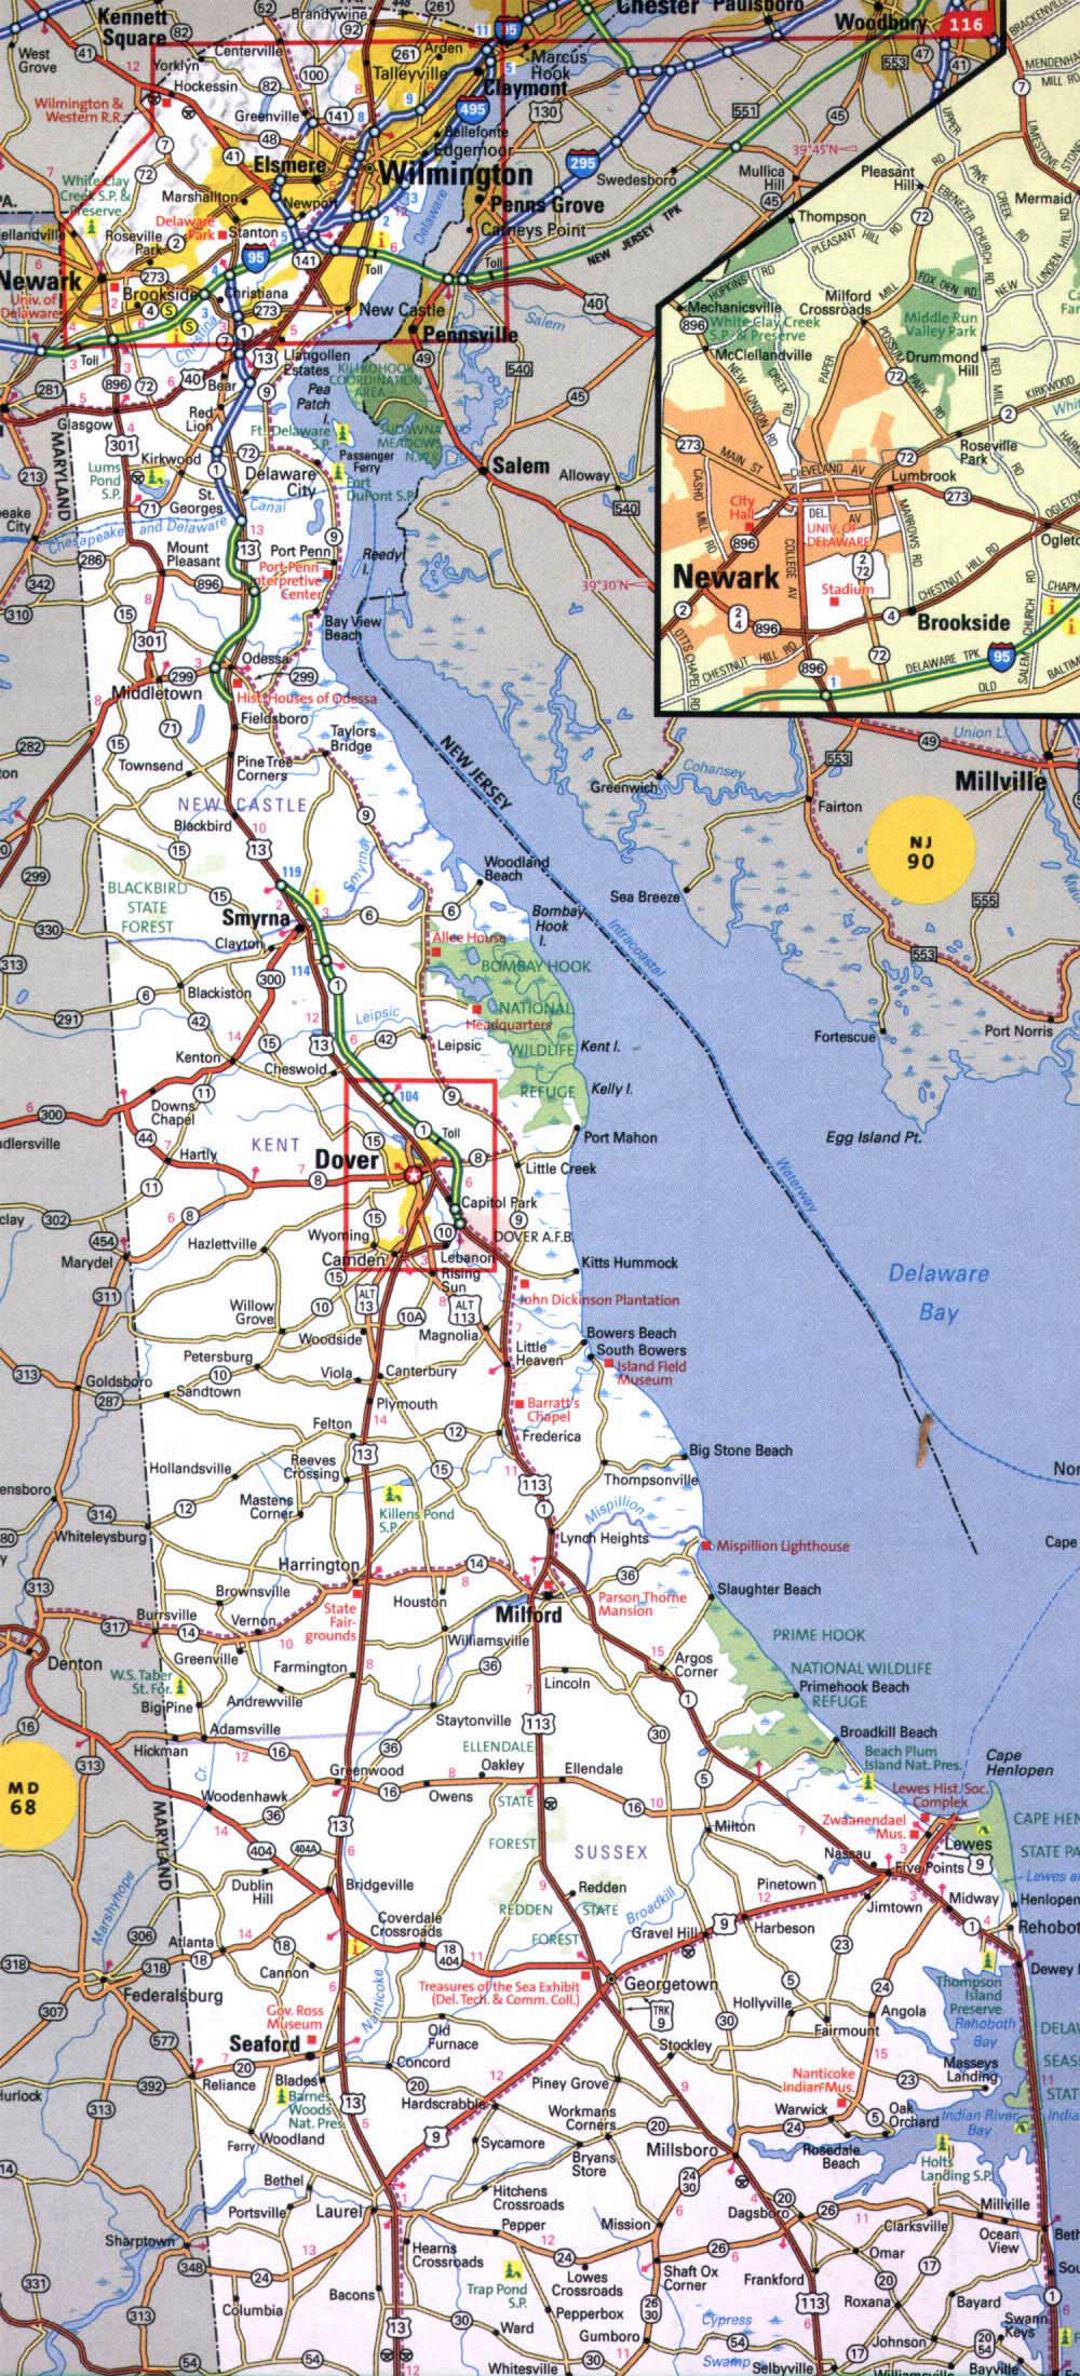 Roads and highways map of Delaware state - 2000